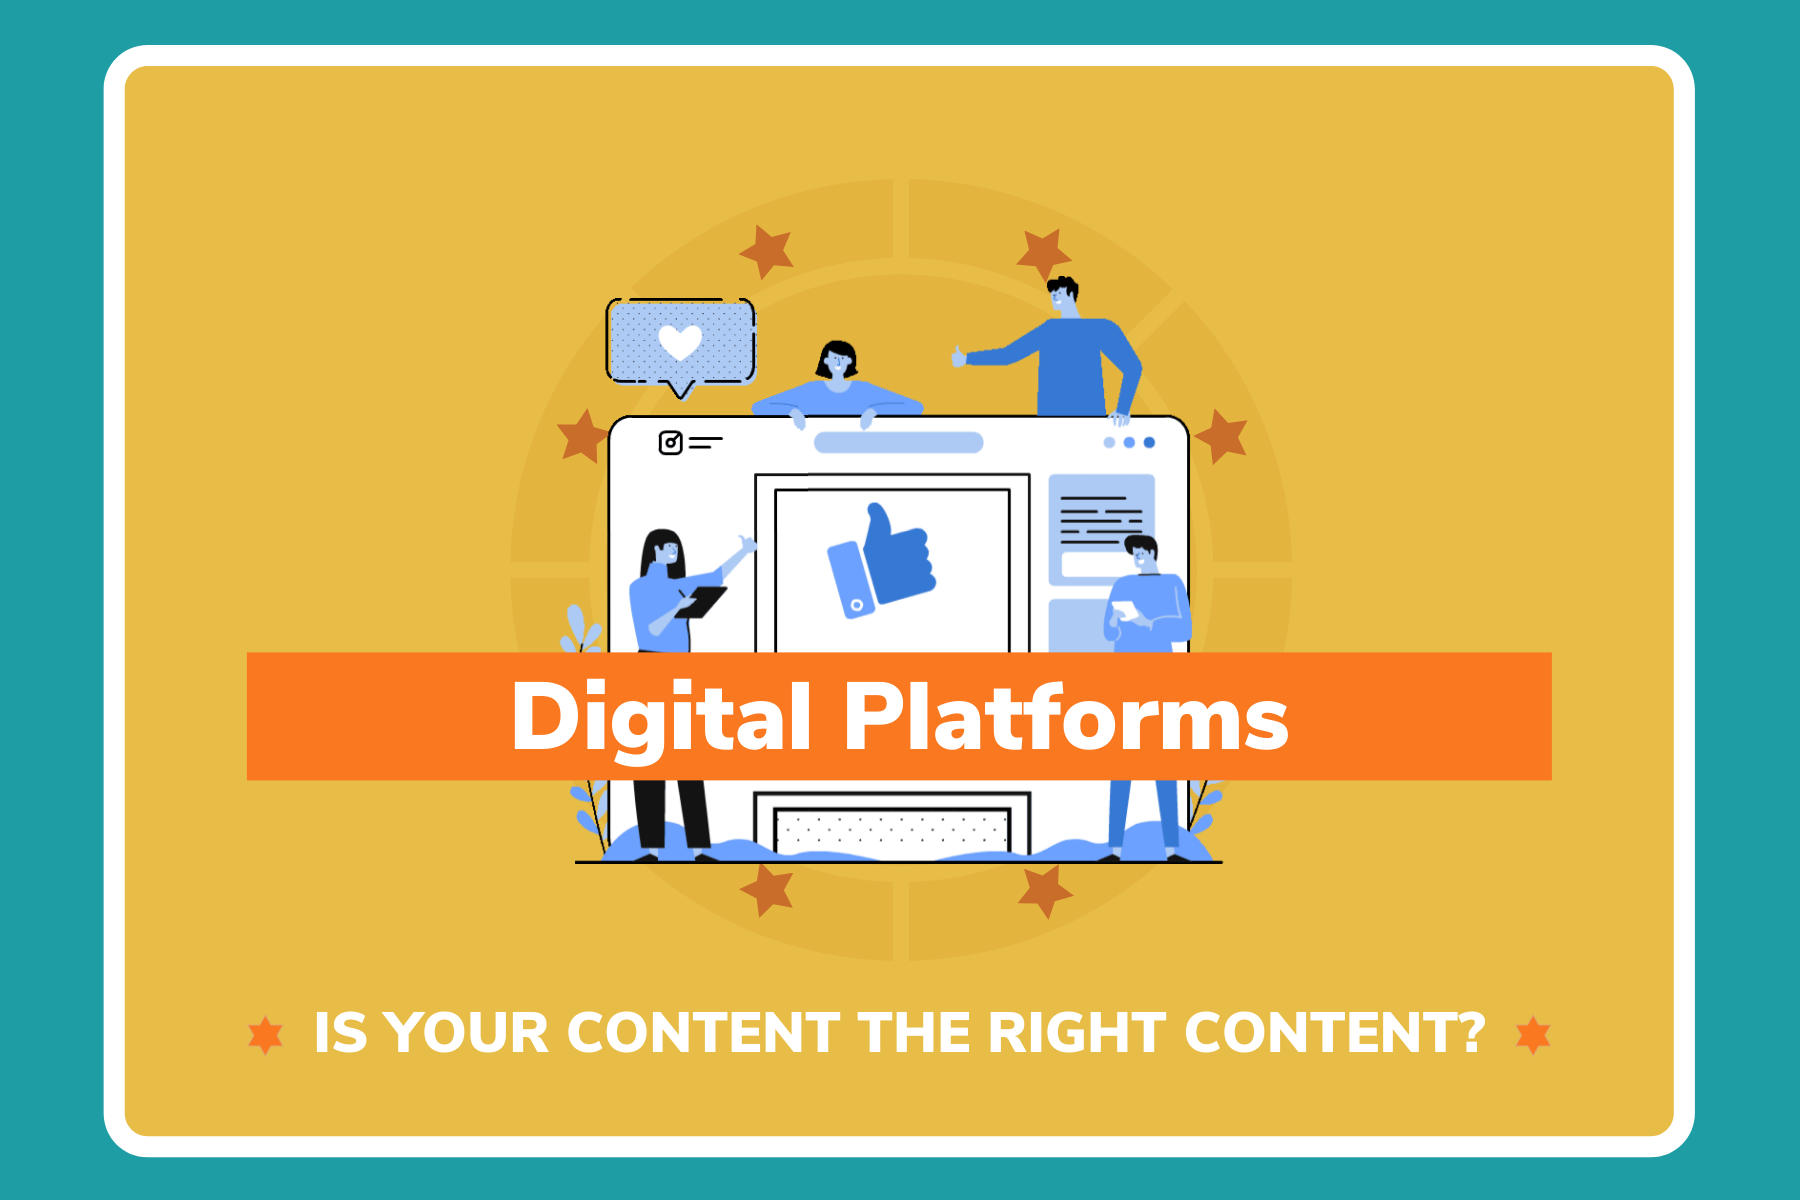 Digital Platforms: Is your content the right content?